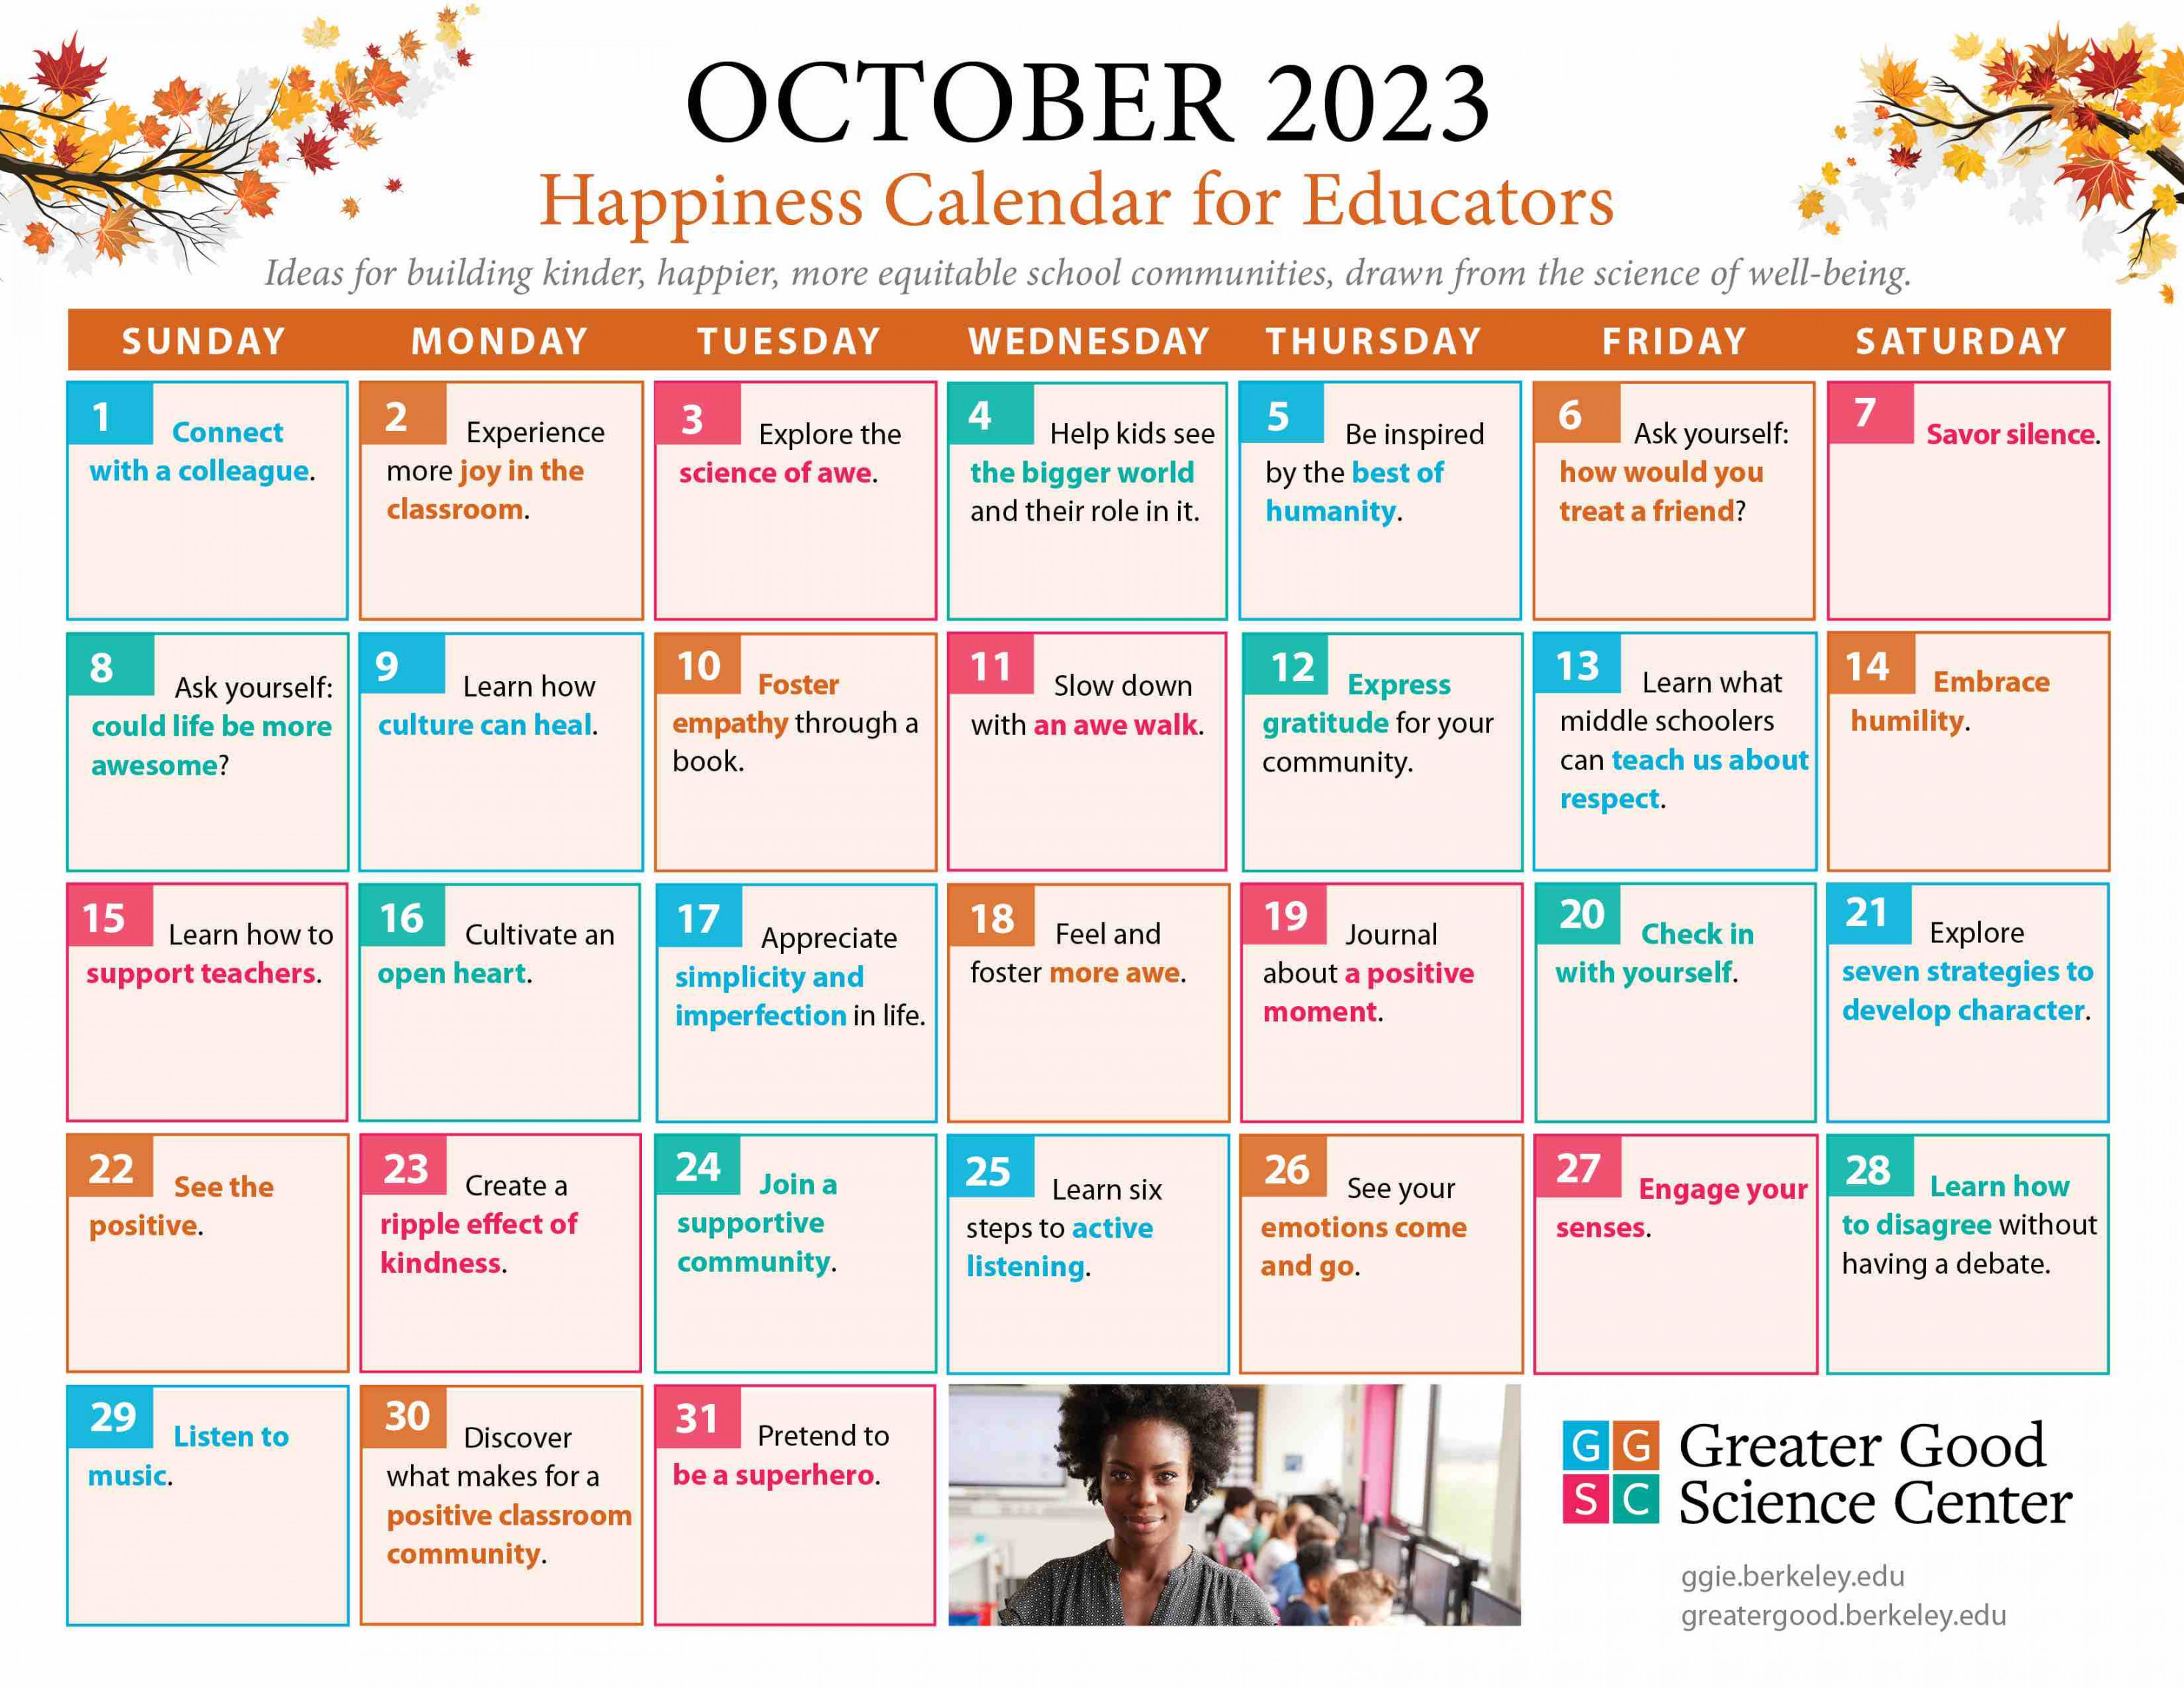 Special Edition: Happiness Calendar for Educators for